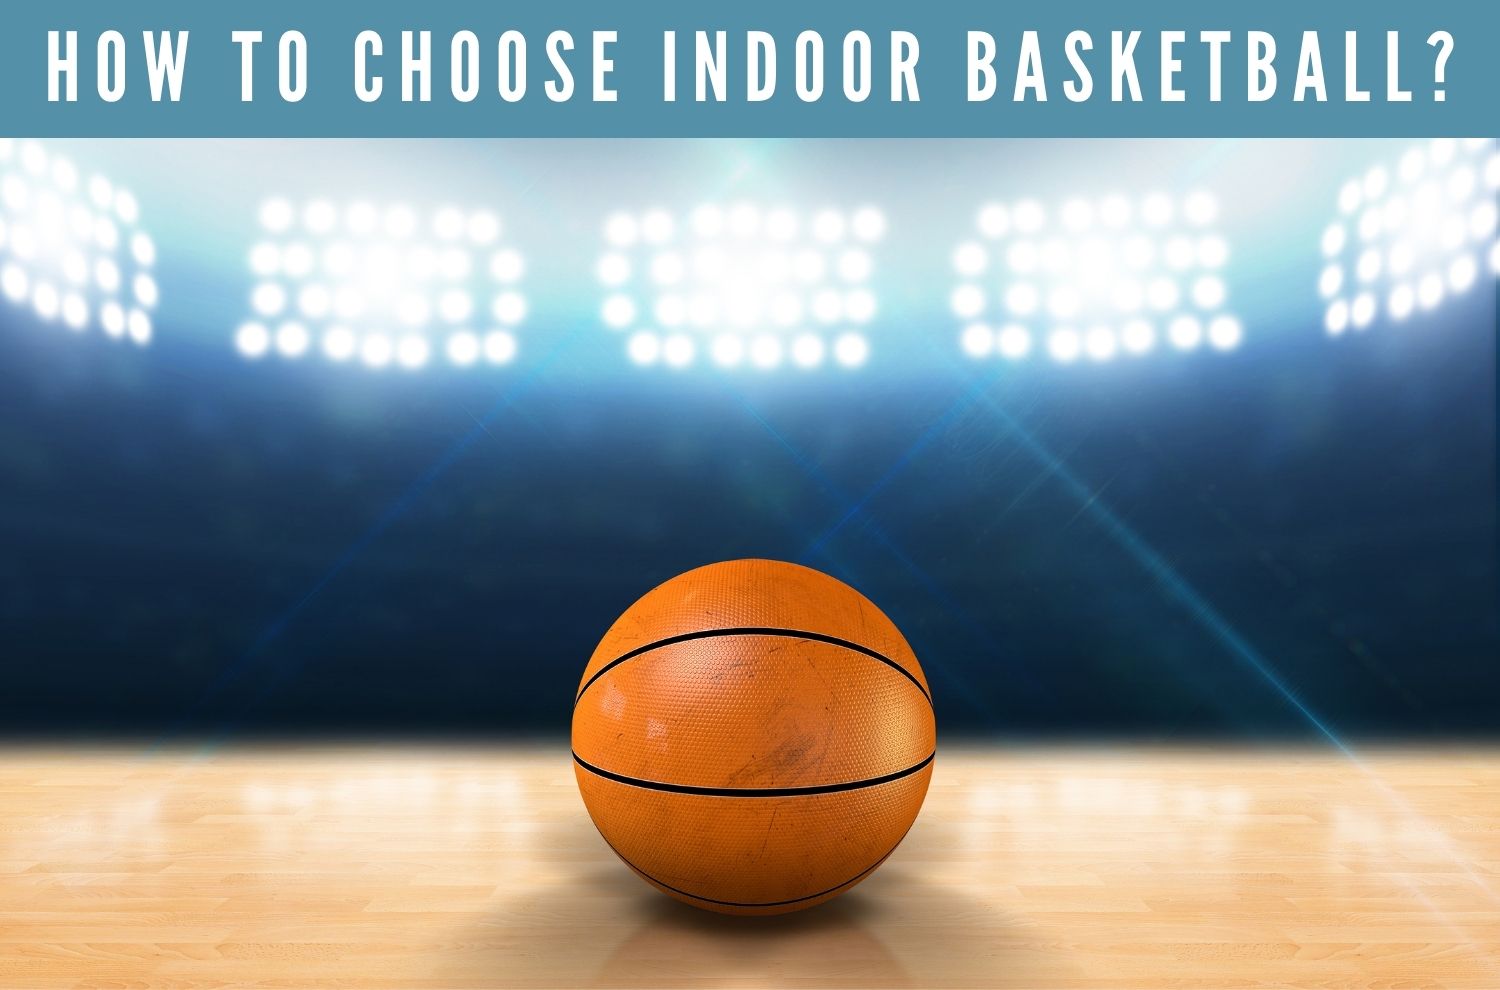 What Is The Difference Between Indoor And Outdoor Basketball?